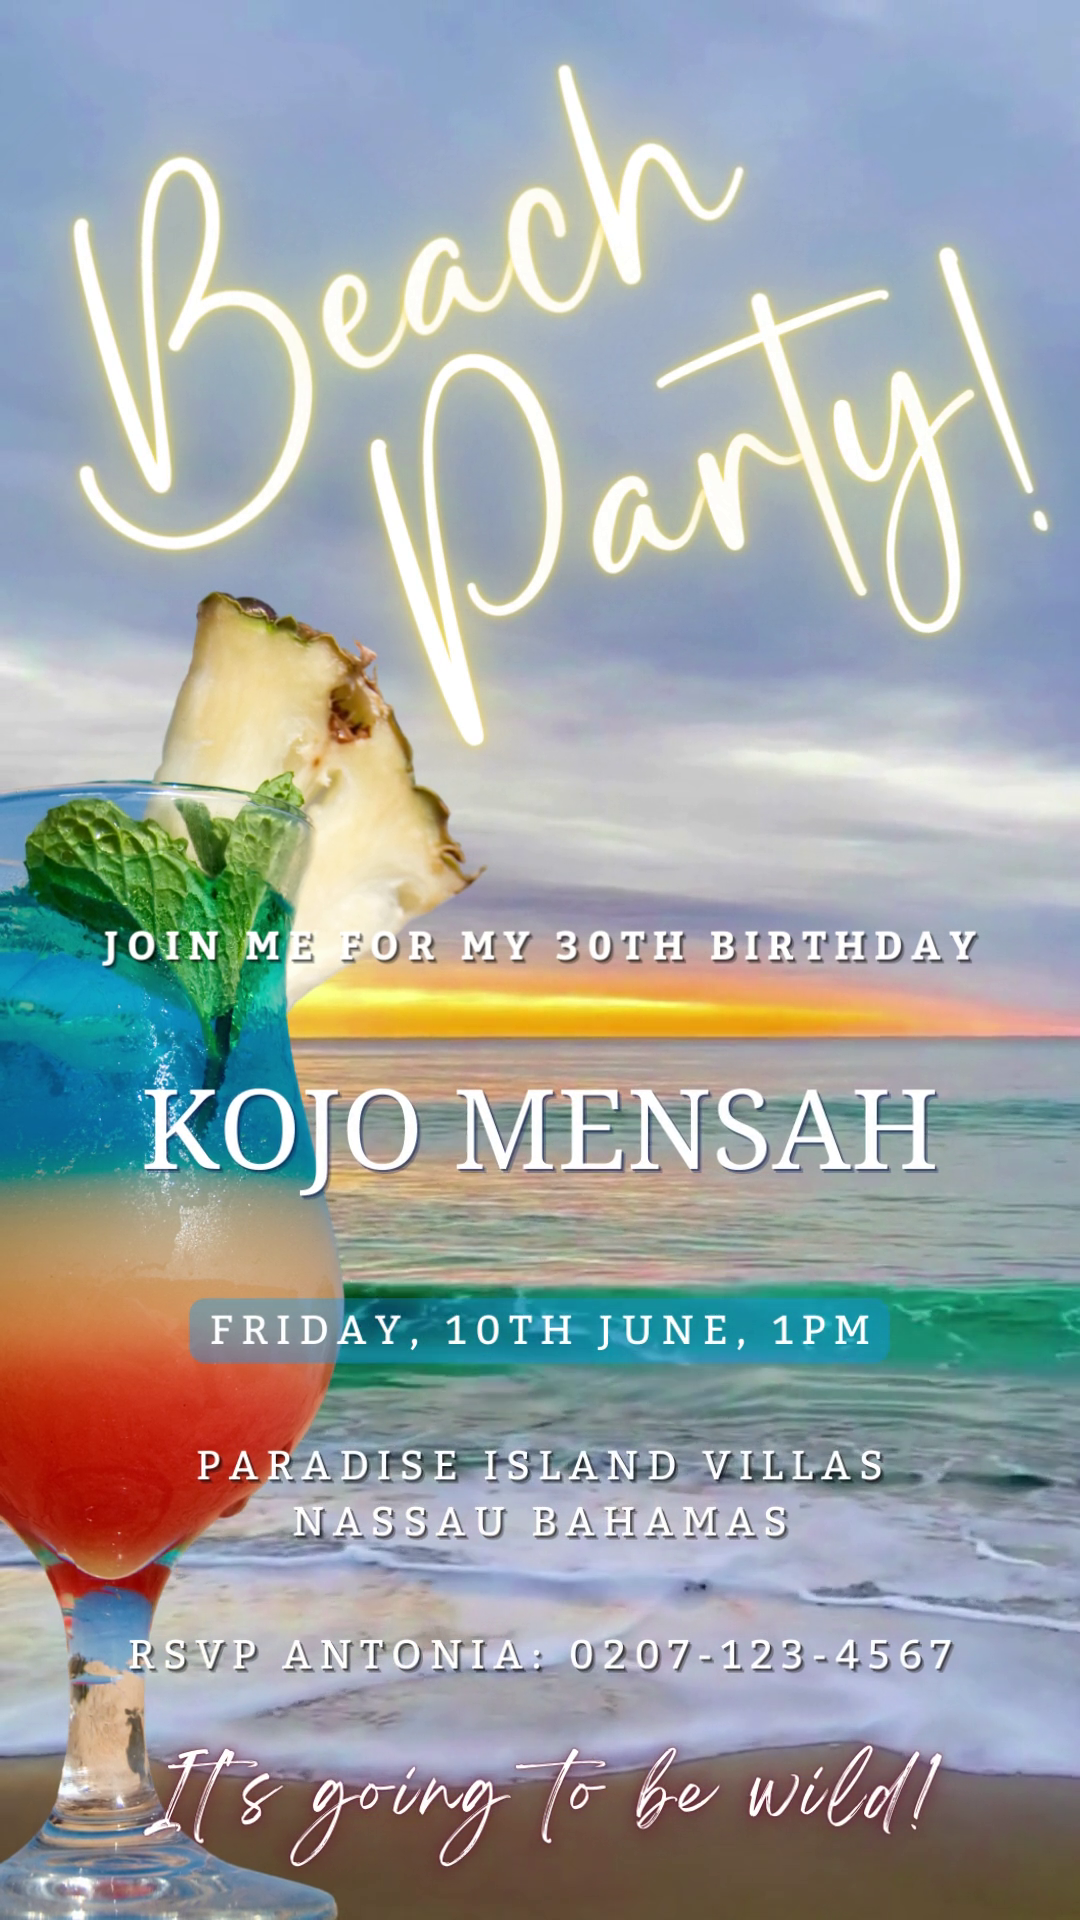 Beach Ocean Sound | Party Video Invitation displayed in a tropical setting with a cocktail garnished with pineapple and mint, emphasizing the customizable digital aspect.